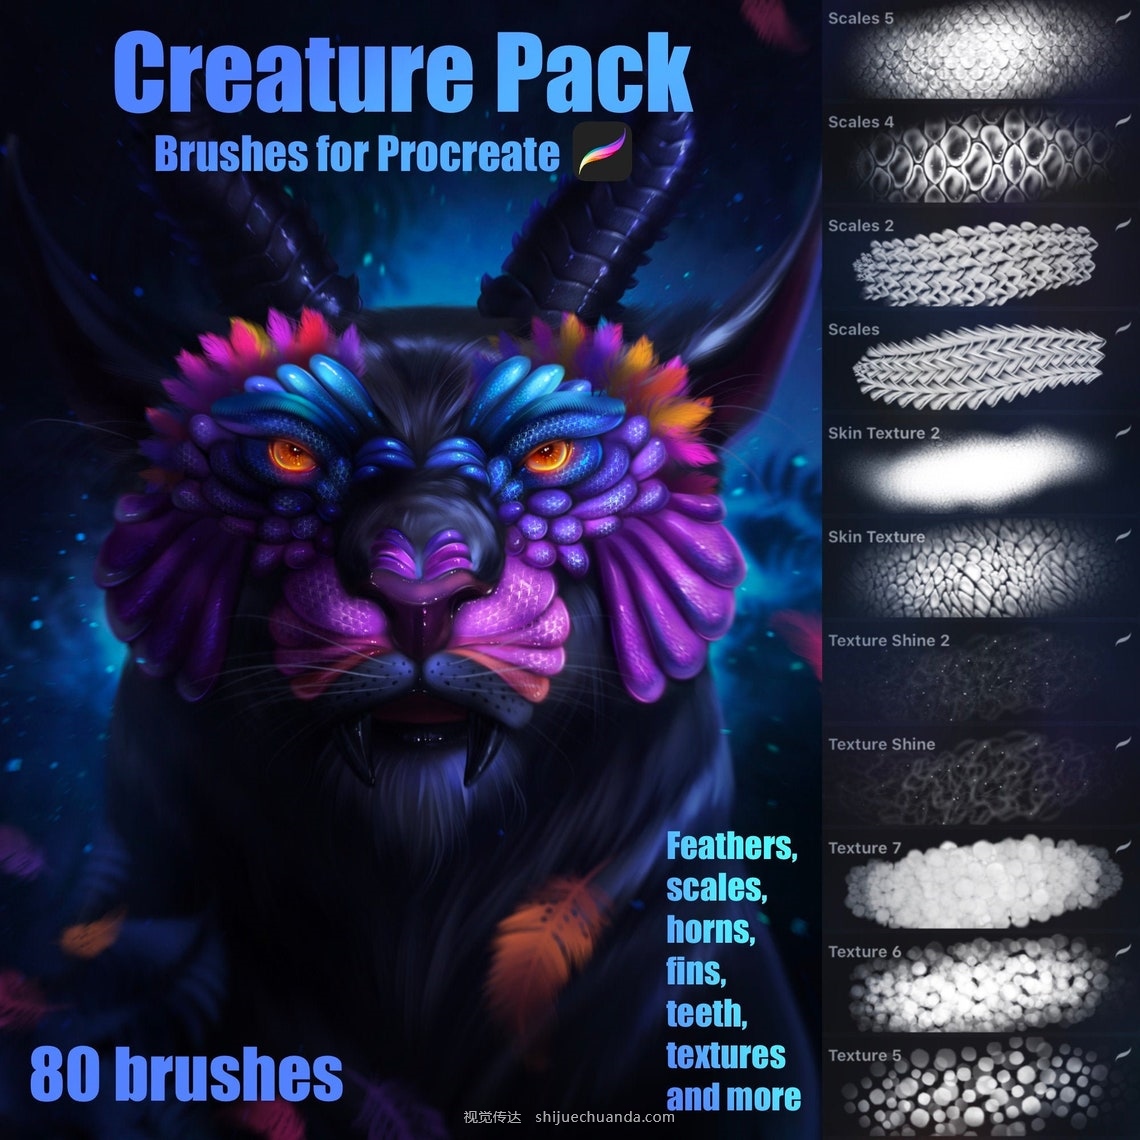 Creature Brushes and Stamps for Procreate-1.jpg